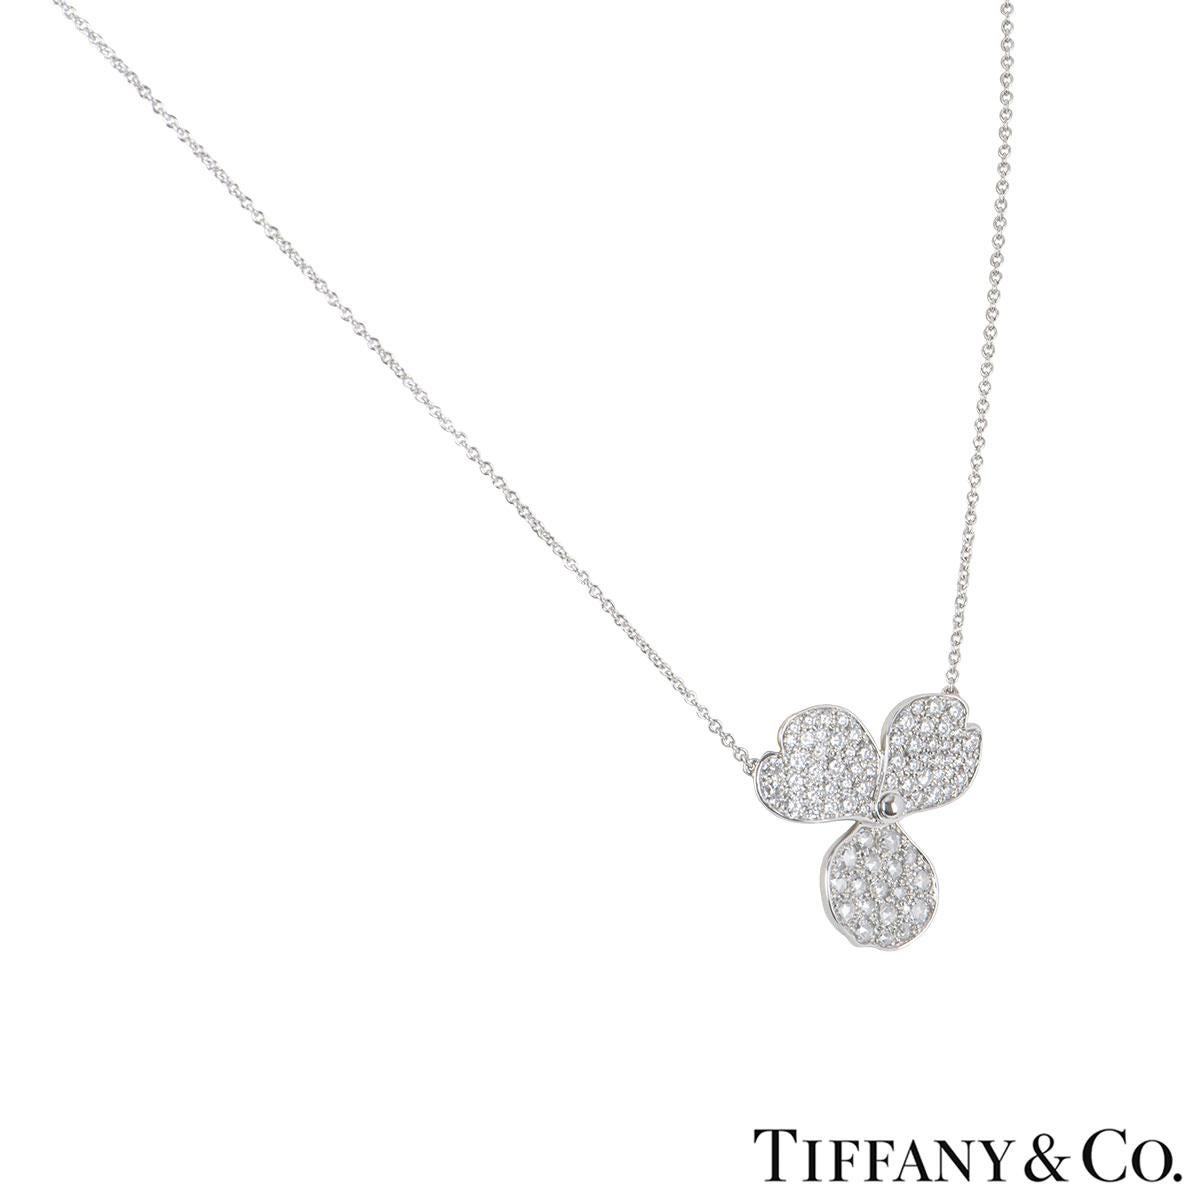 A platinum diamond pendant by Tiffany & Co. from the Paper Flowers collection. The pendant features a flower motif with 3 petals pave set with round brilliant cut diamonds with a total diamond weight of 0.85ct. The flower motif measures 2.10cm by